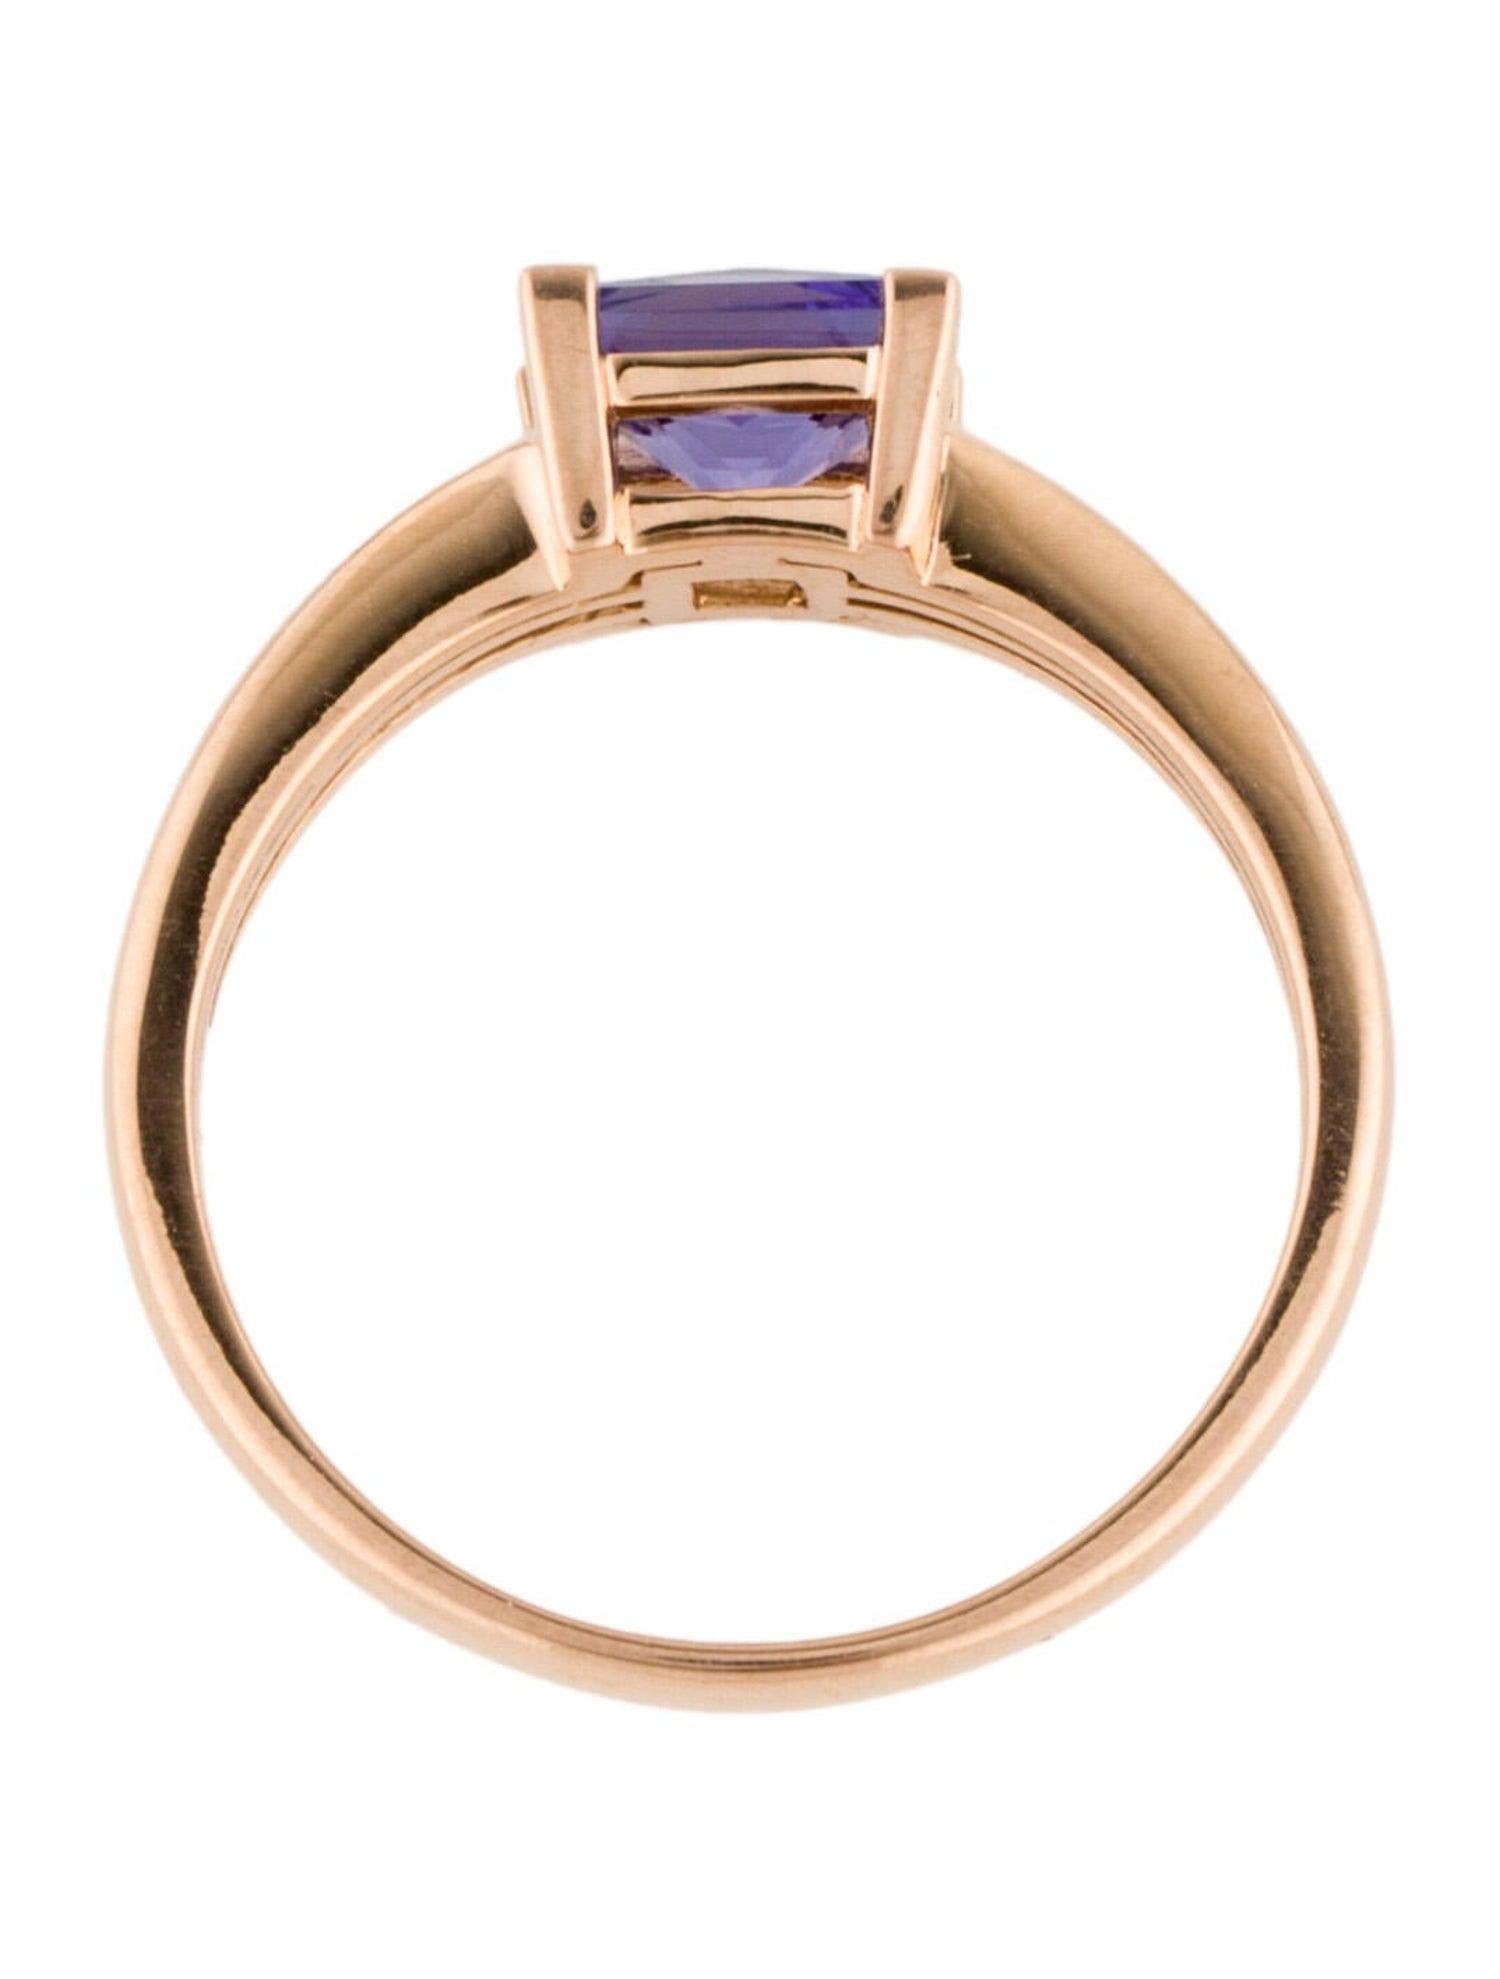 18K Tanzanite Cocktail Ring 2.50ctw - Size 7.75 - Exquisite Statement Jewelry In New Condition For Sale In Holtsville, NY